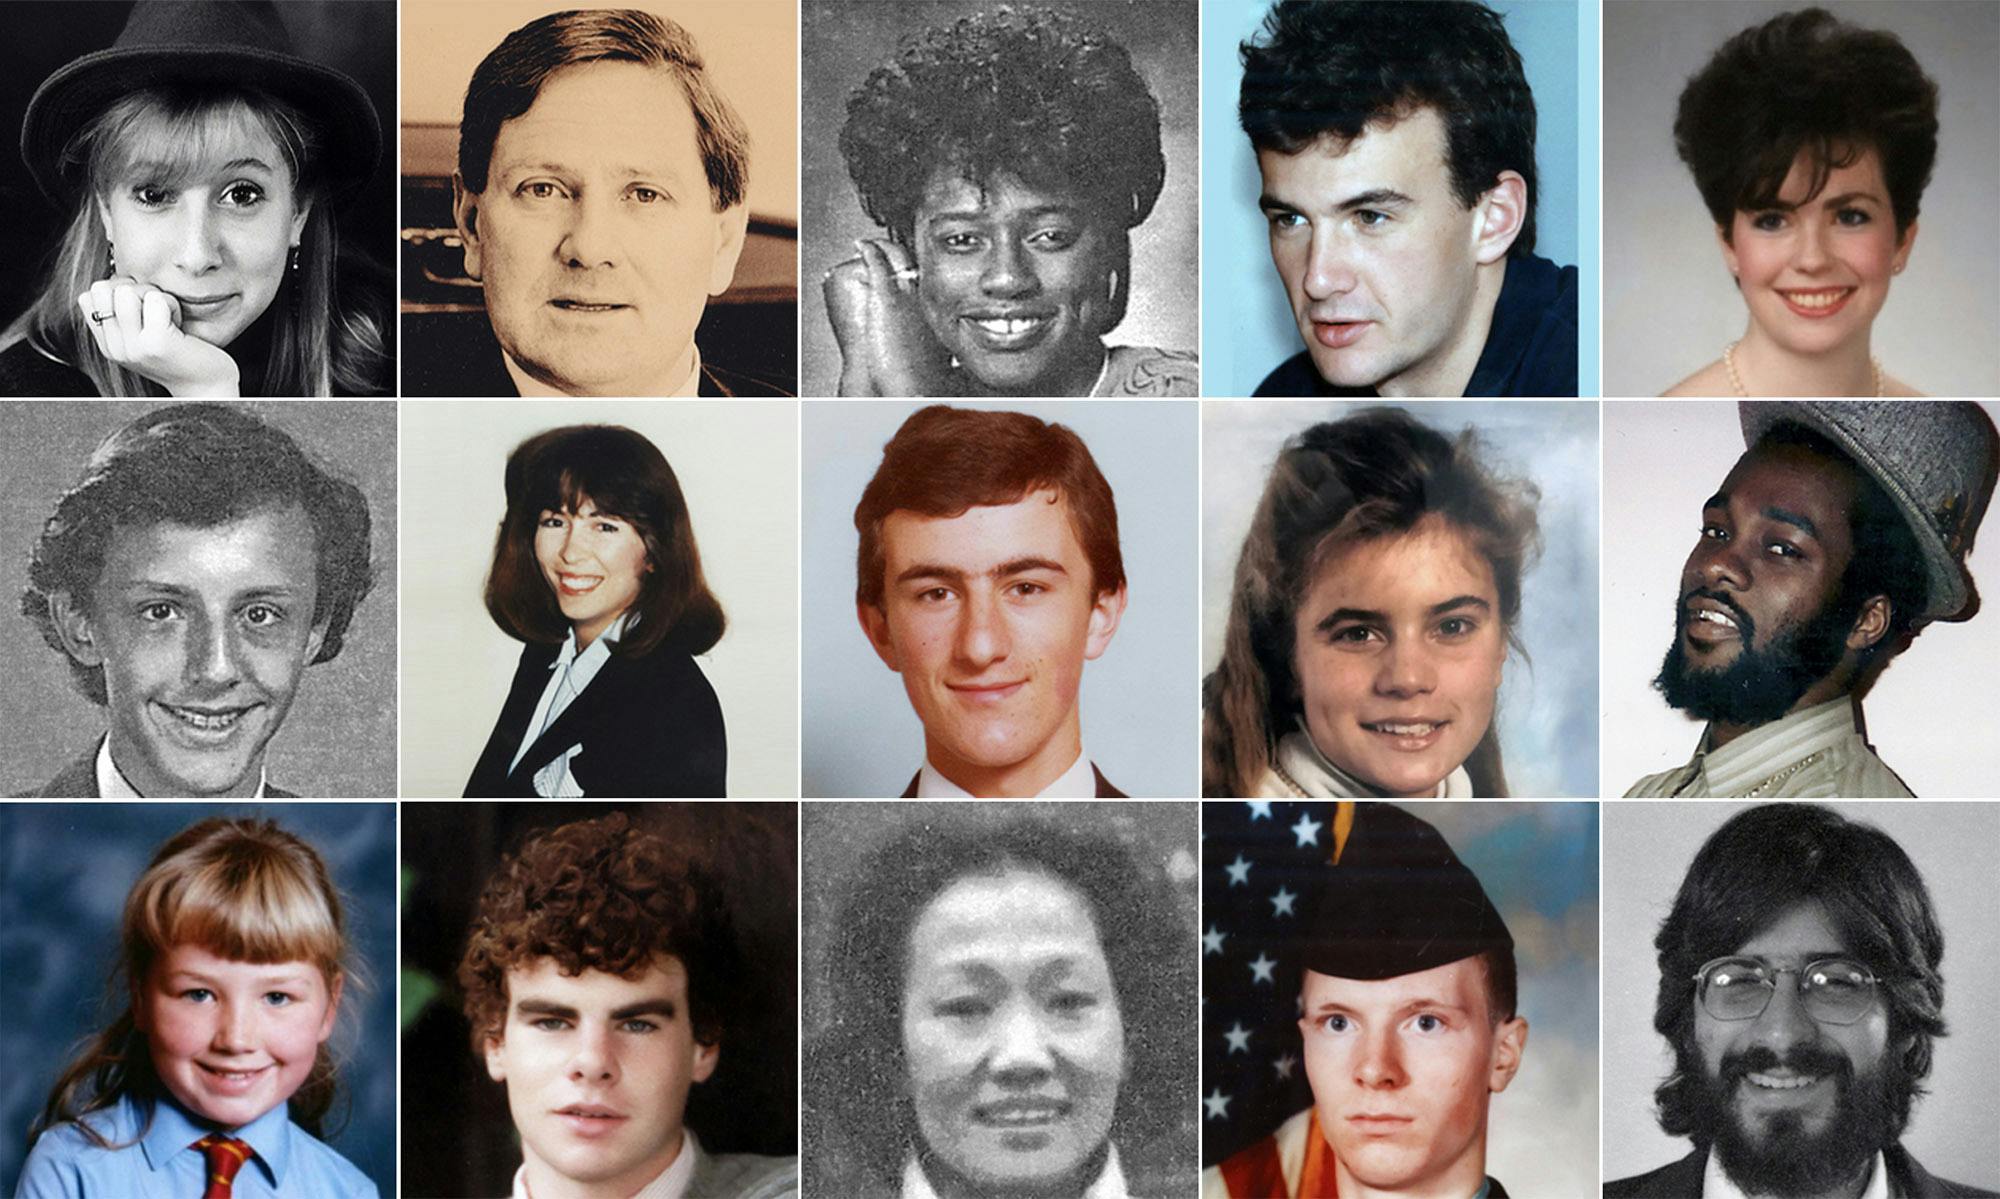 Faces of Bombing of Pan Am 103 Victims